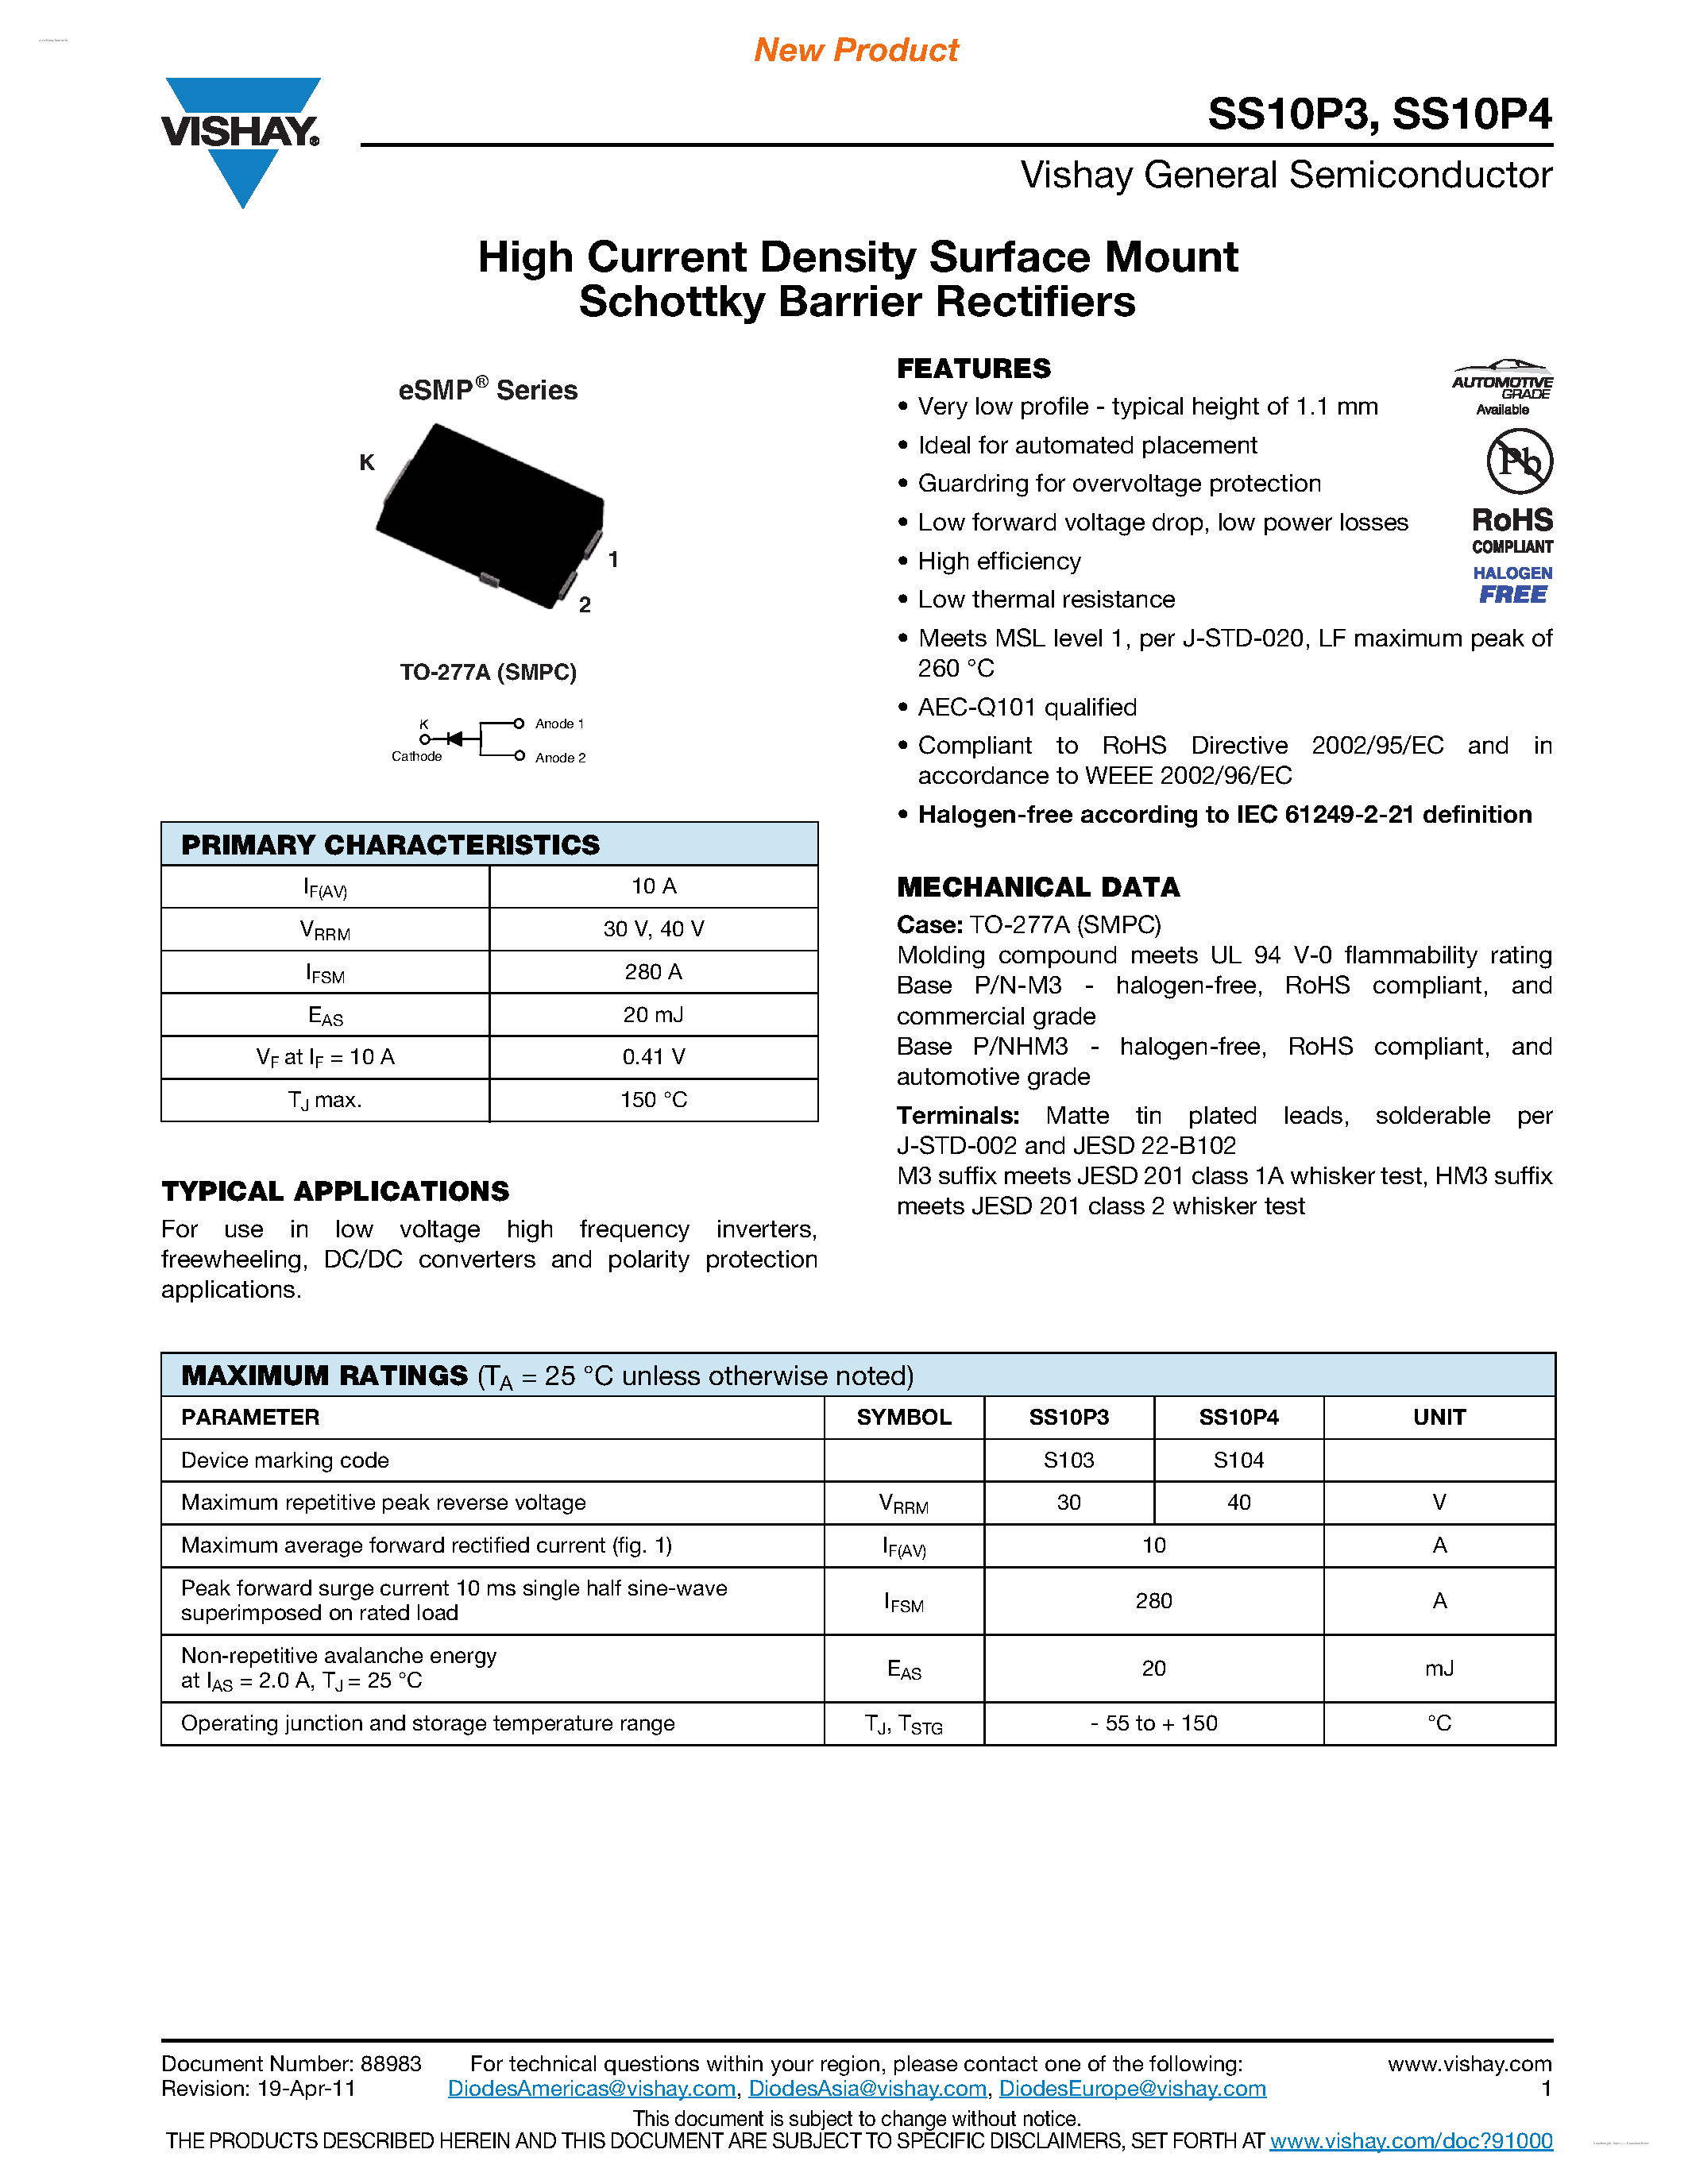 Datasheet SS10P3 - (SS10P3 / SS10P4) High Current Density Surface Mount Schottky Barrier Rectifiers page 1